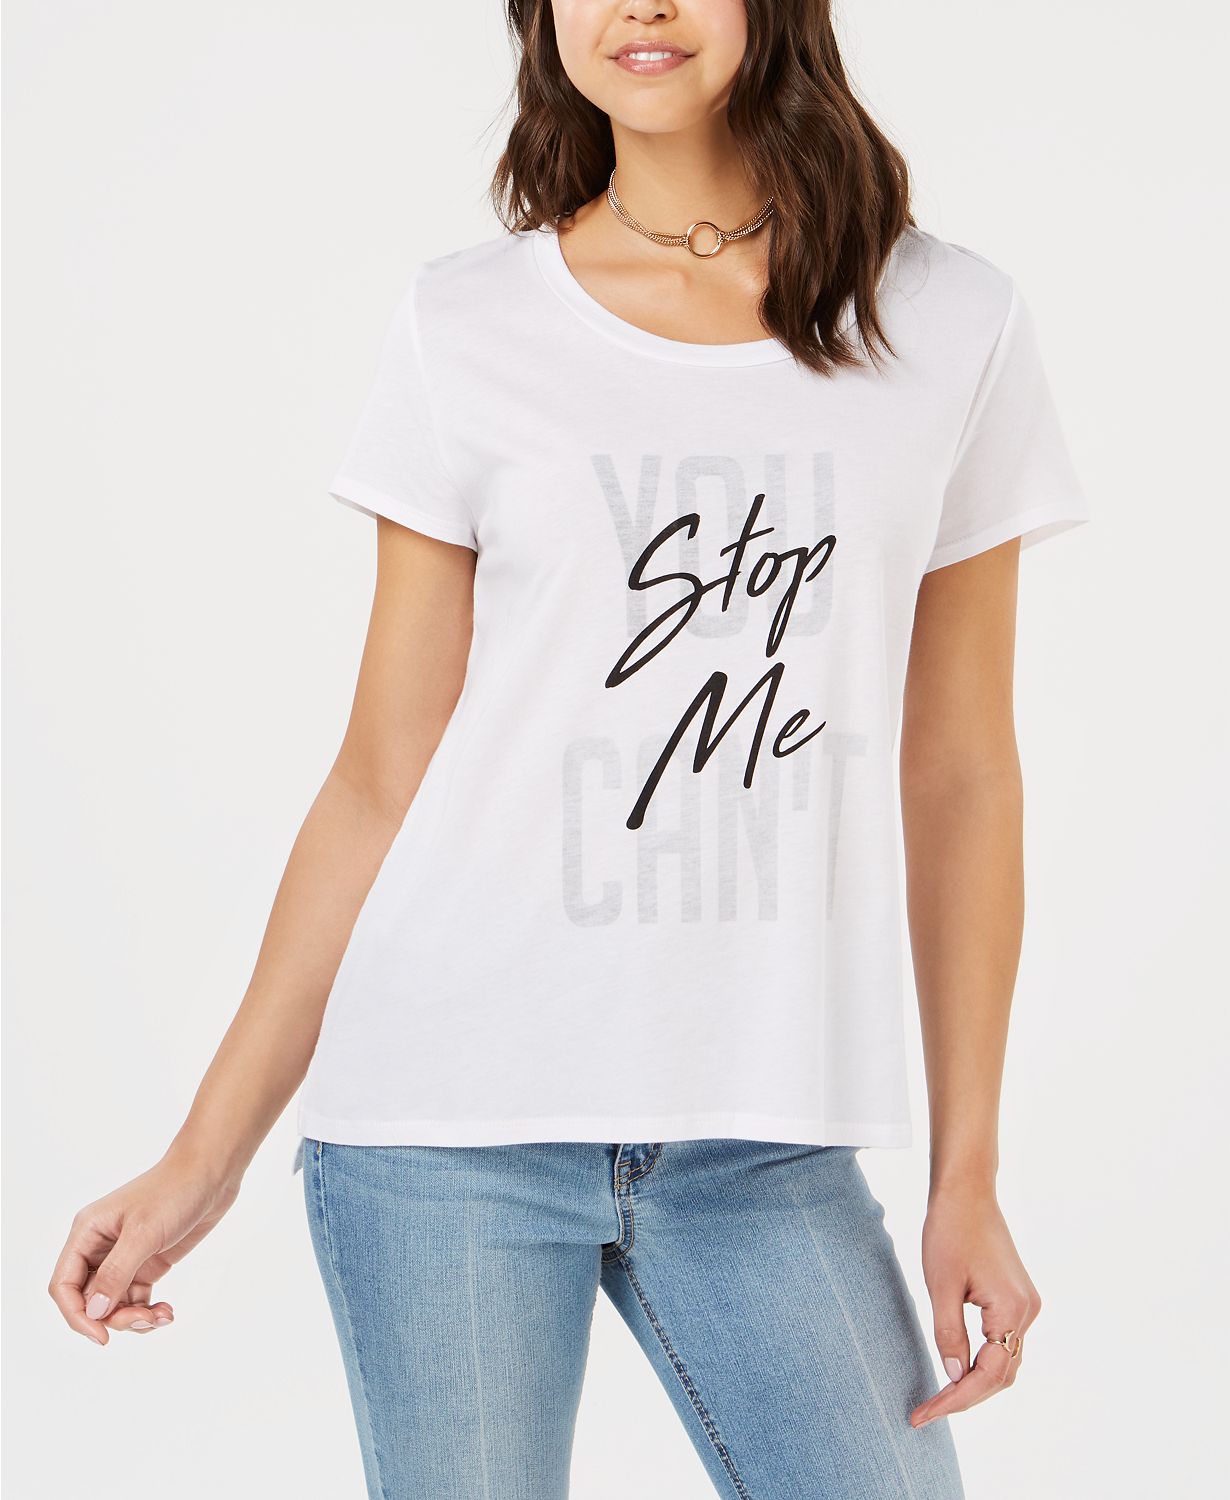 CARBON COPY You Cant Stop Me Short Sleeve Top WHITE M